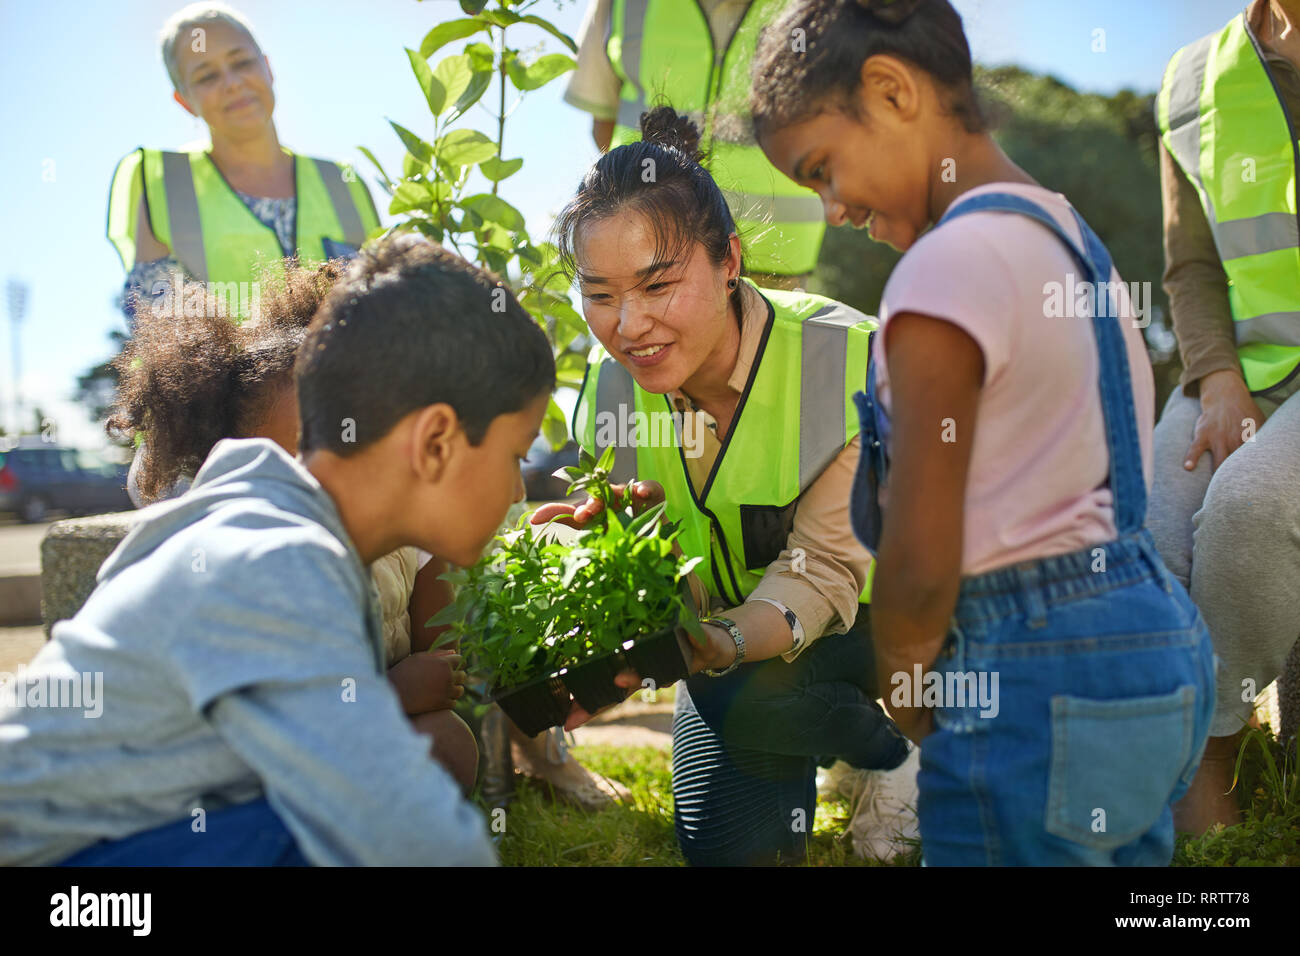 Woman and children volunteers planting herbs in sunny park Stock Photo